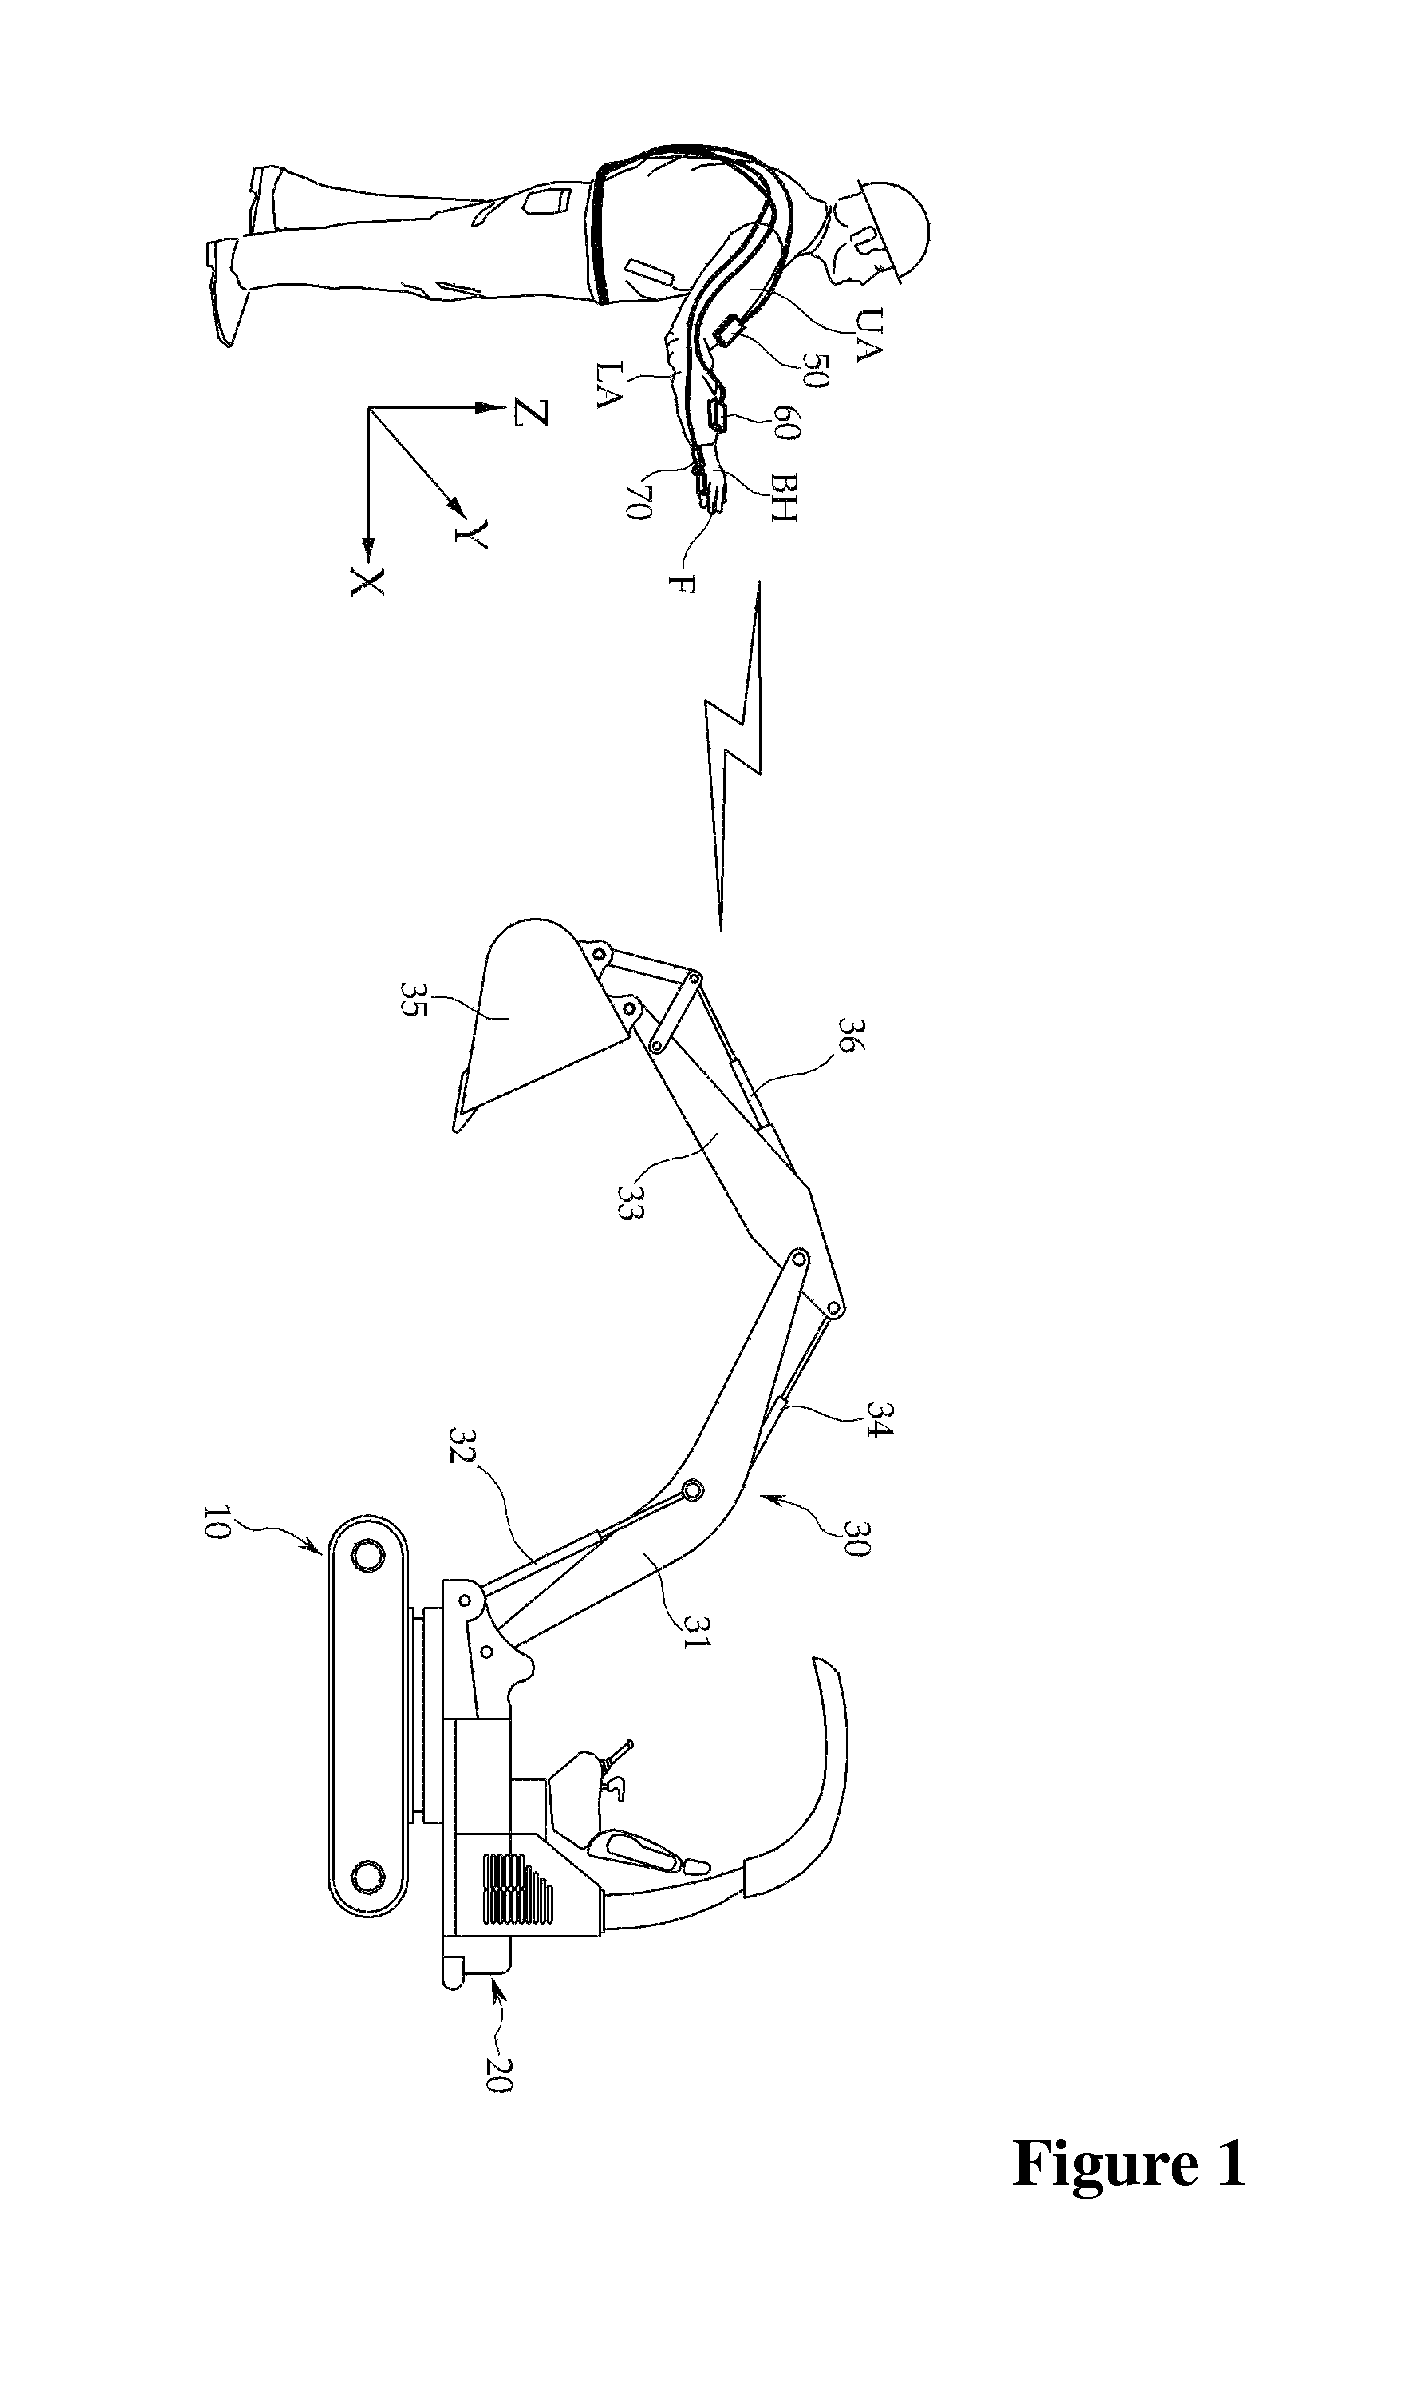 Remote control system and method for construction equipment